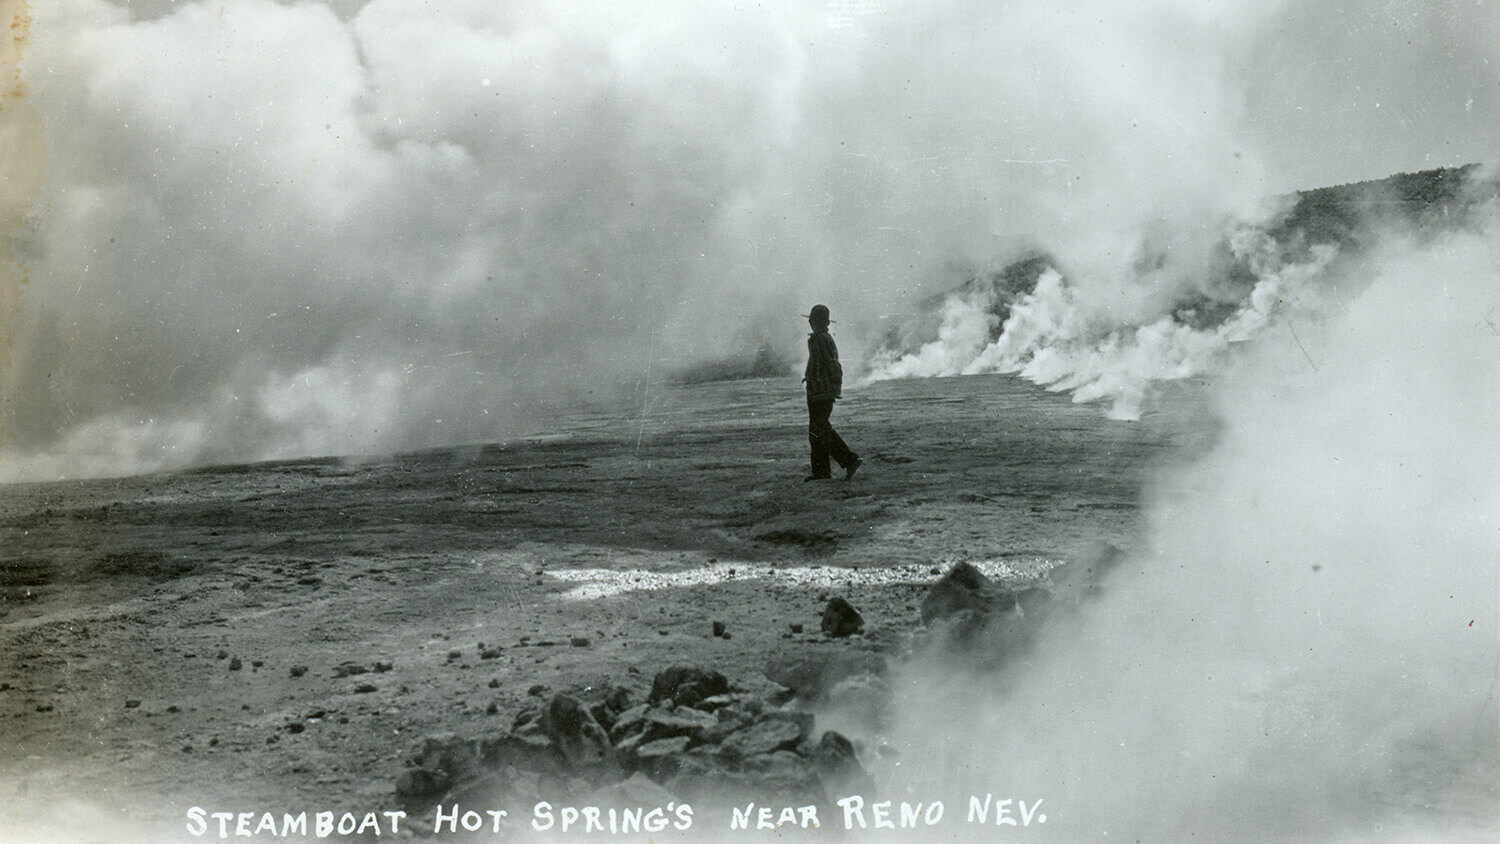 An early photograph of Steamboat Hot Springs (Travel Nevada/Nevada Historical Society)